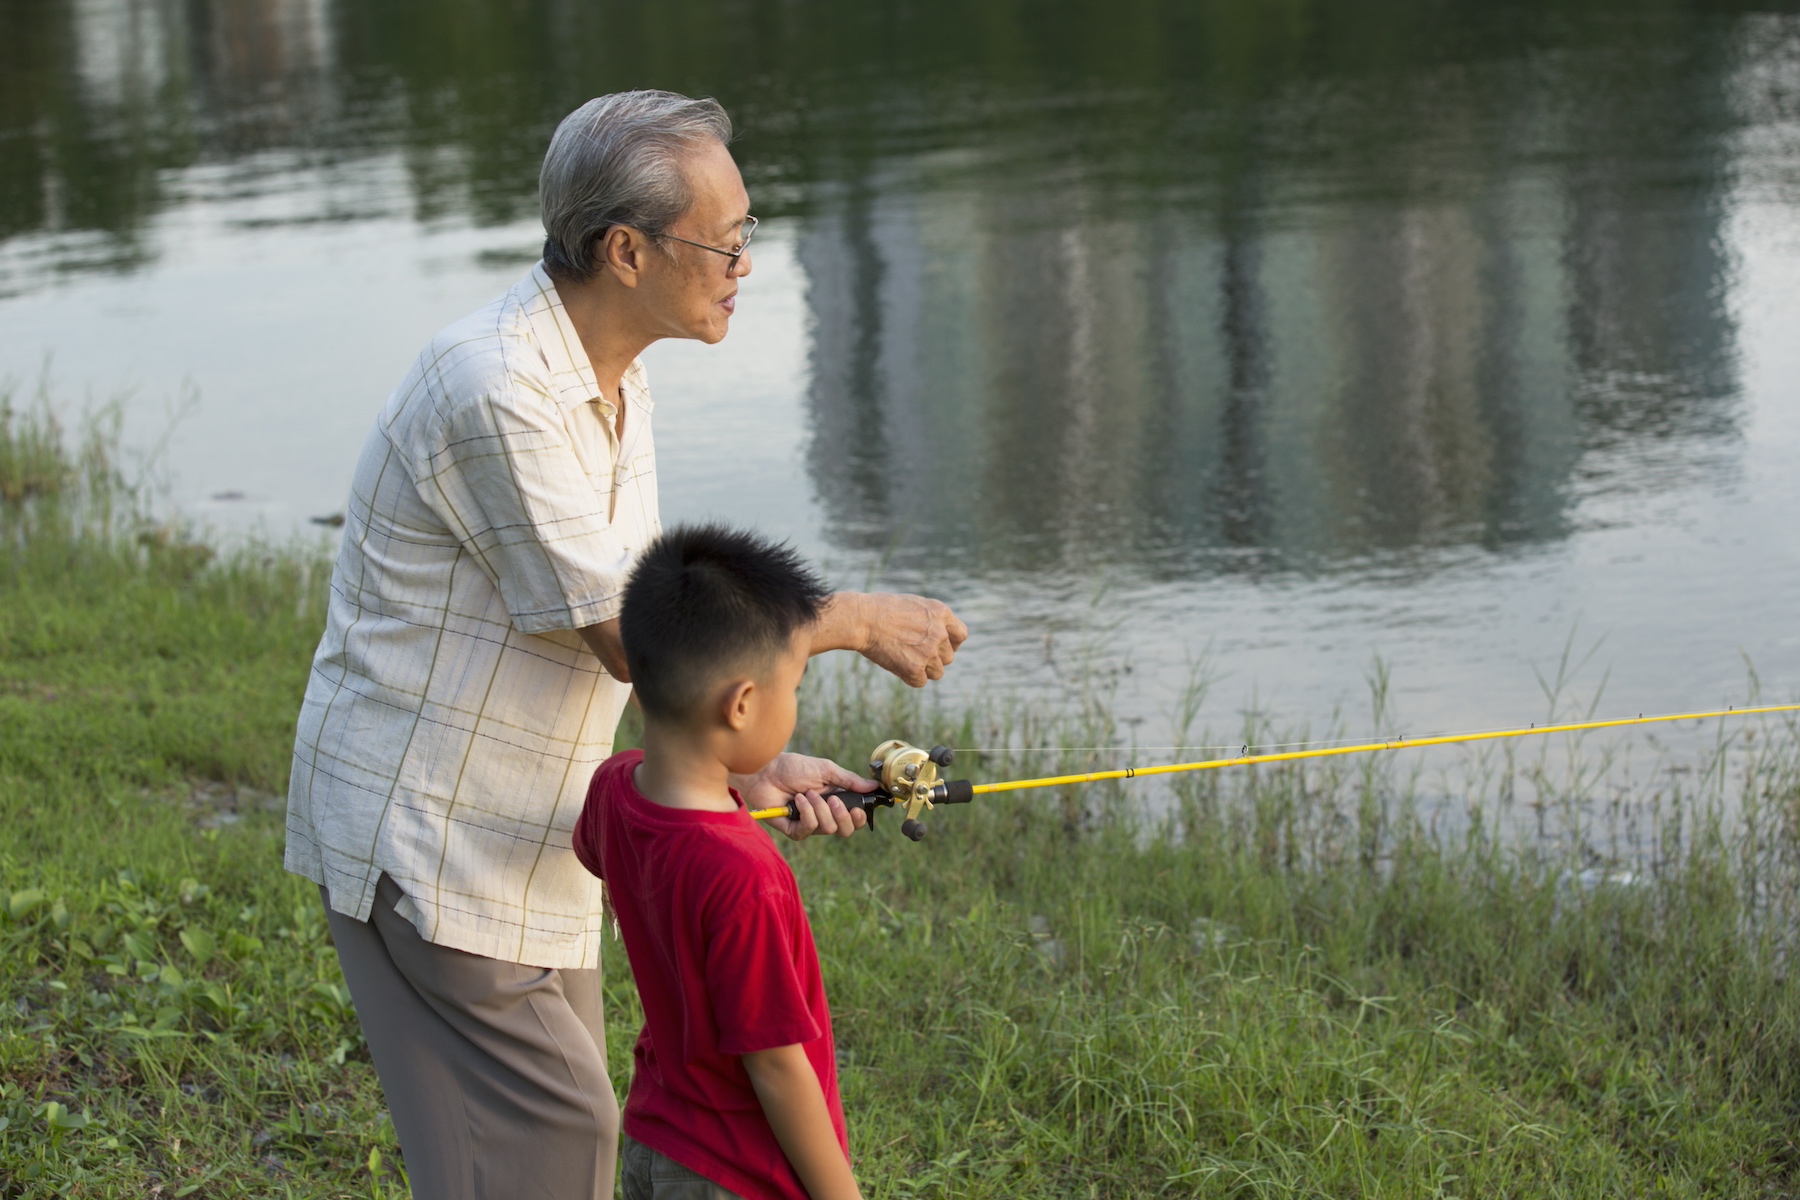 A grandfather teaches his grandson how to fish at the edge of a pond